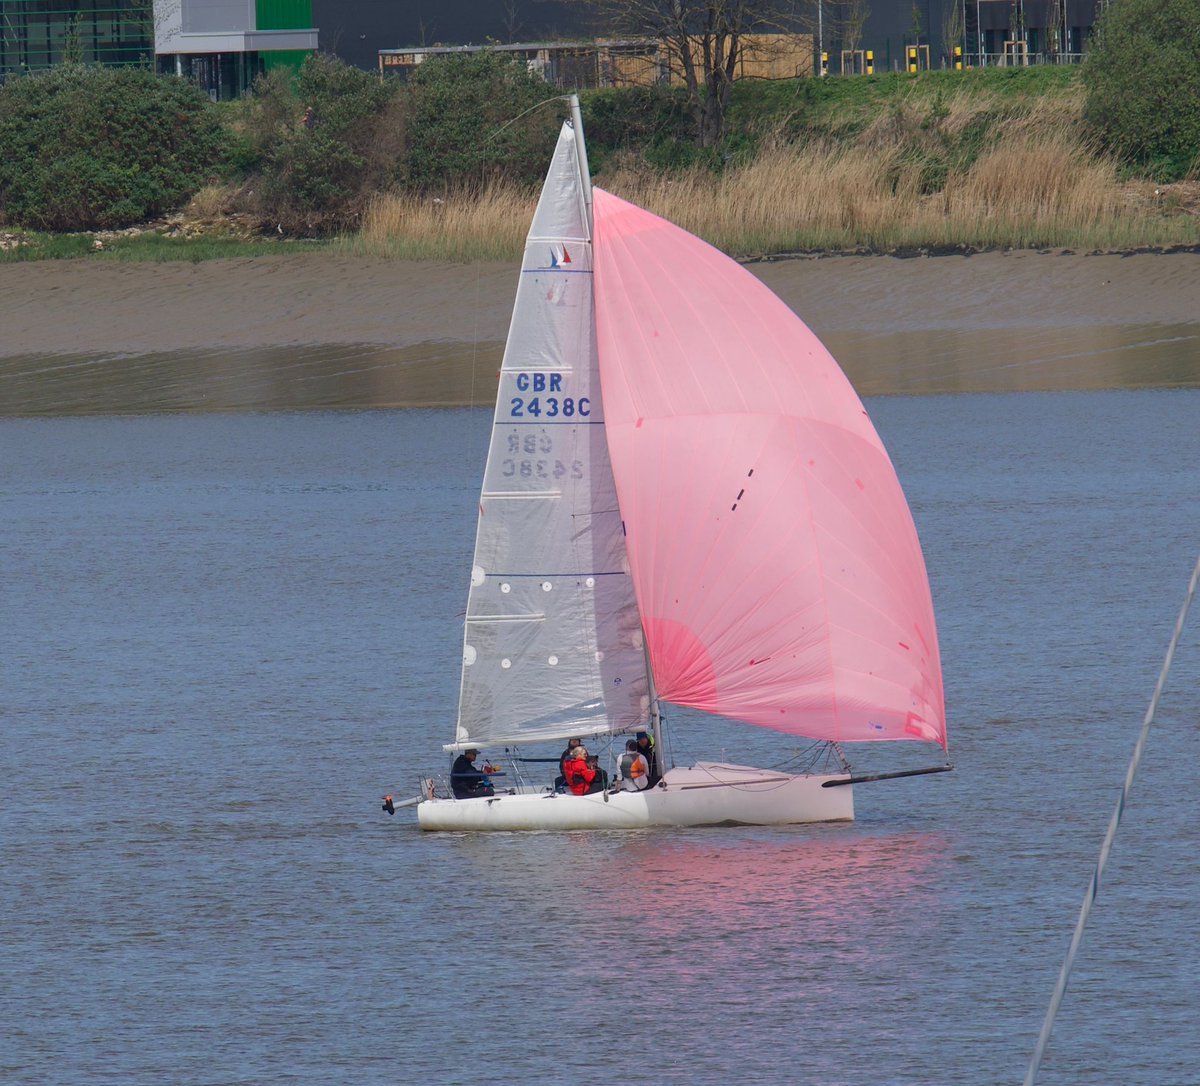 Great turnout for last Saturday's multi-event race to #Erith by boat and then run or cycle back to #Greenwich. Results on corrected time: Fastest overall = Charlie + Cito (rowing boat) Fastest cyclist + sailing = Andrew Clarke + Elektra Fastest runner + sailing = Minna + Elektra